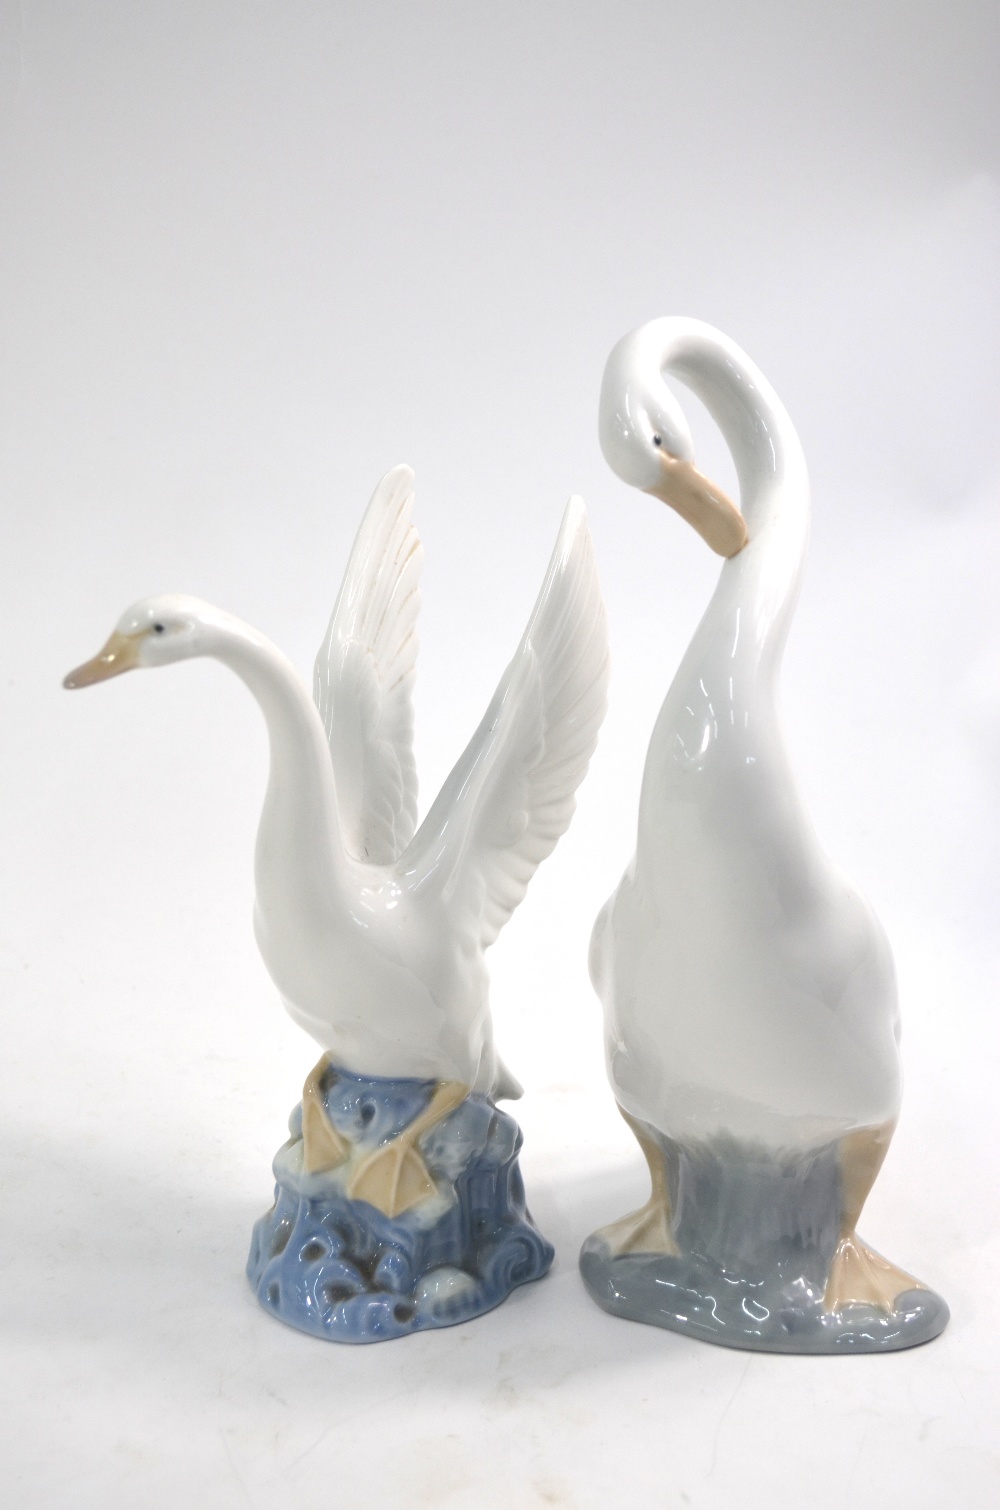 A Nao model of a mute swan and cygnet, no. - Image 2 of 7